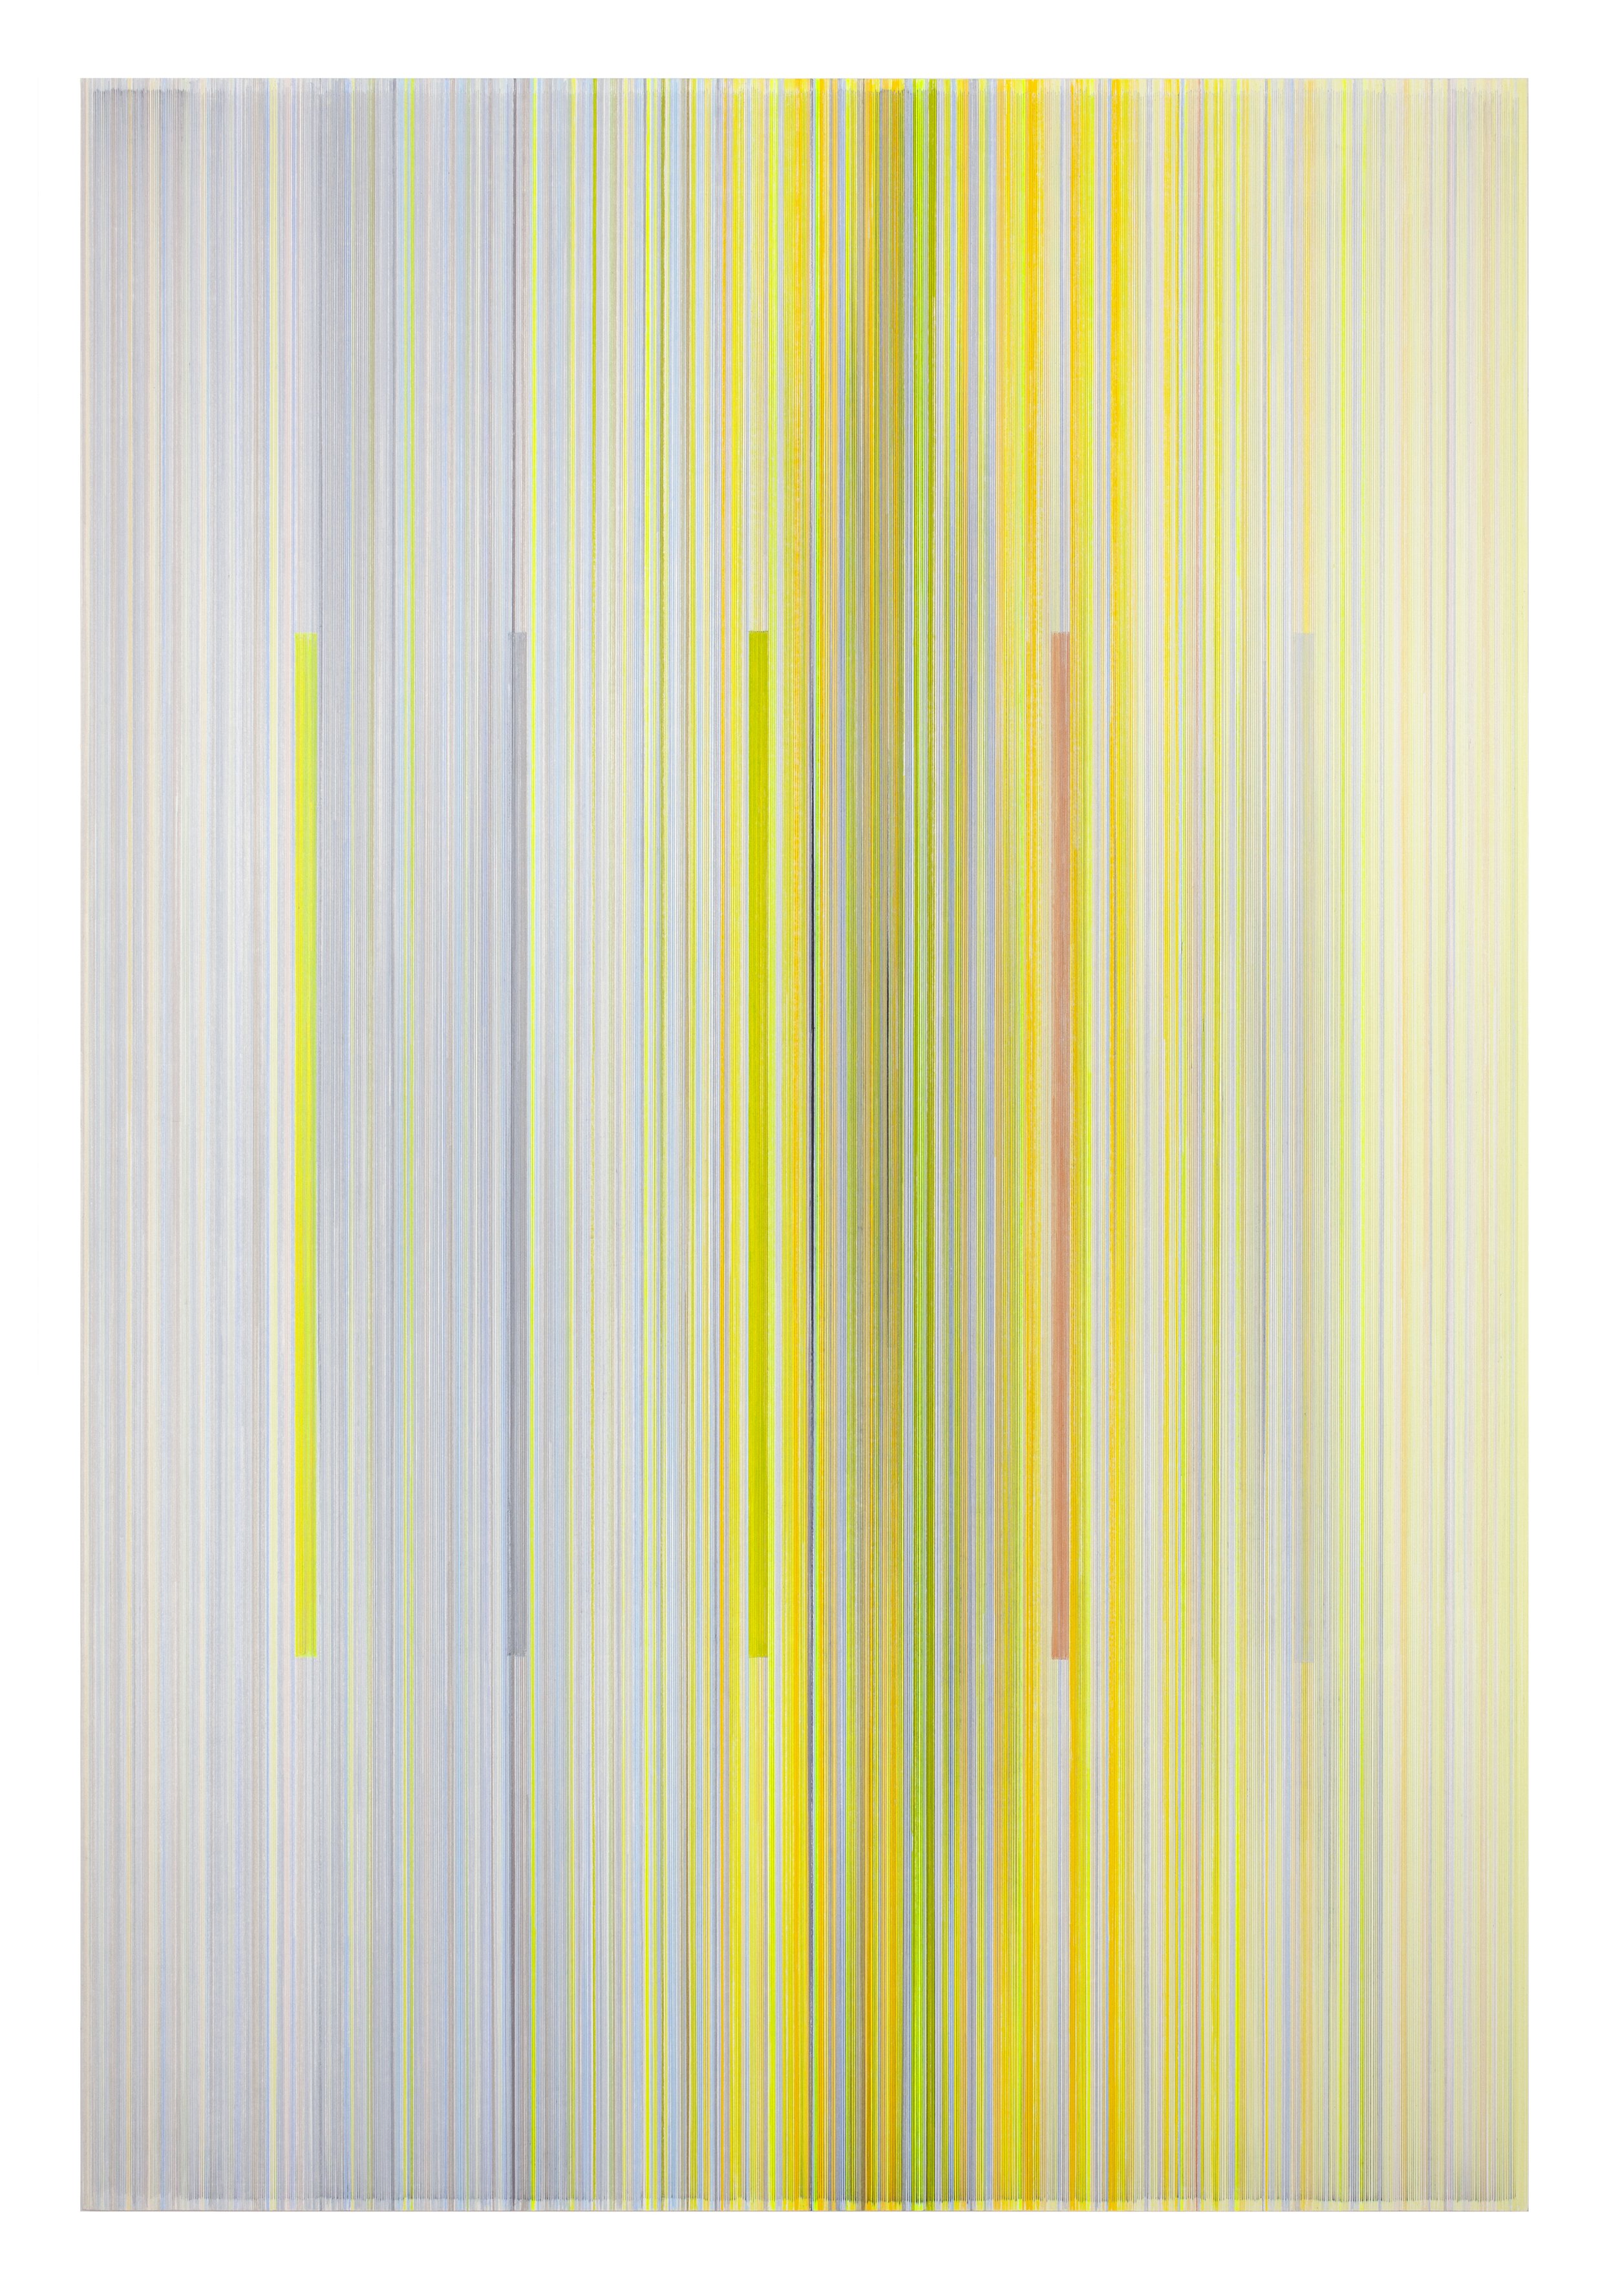    sunlit   2022 graphite and colored pencil on mat board 62 x 43 inches 